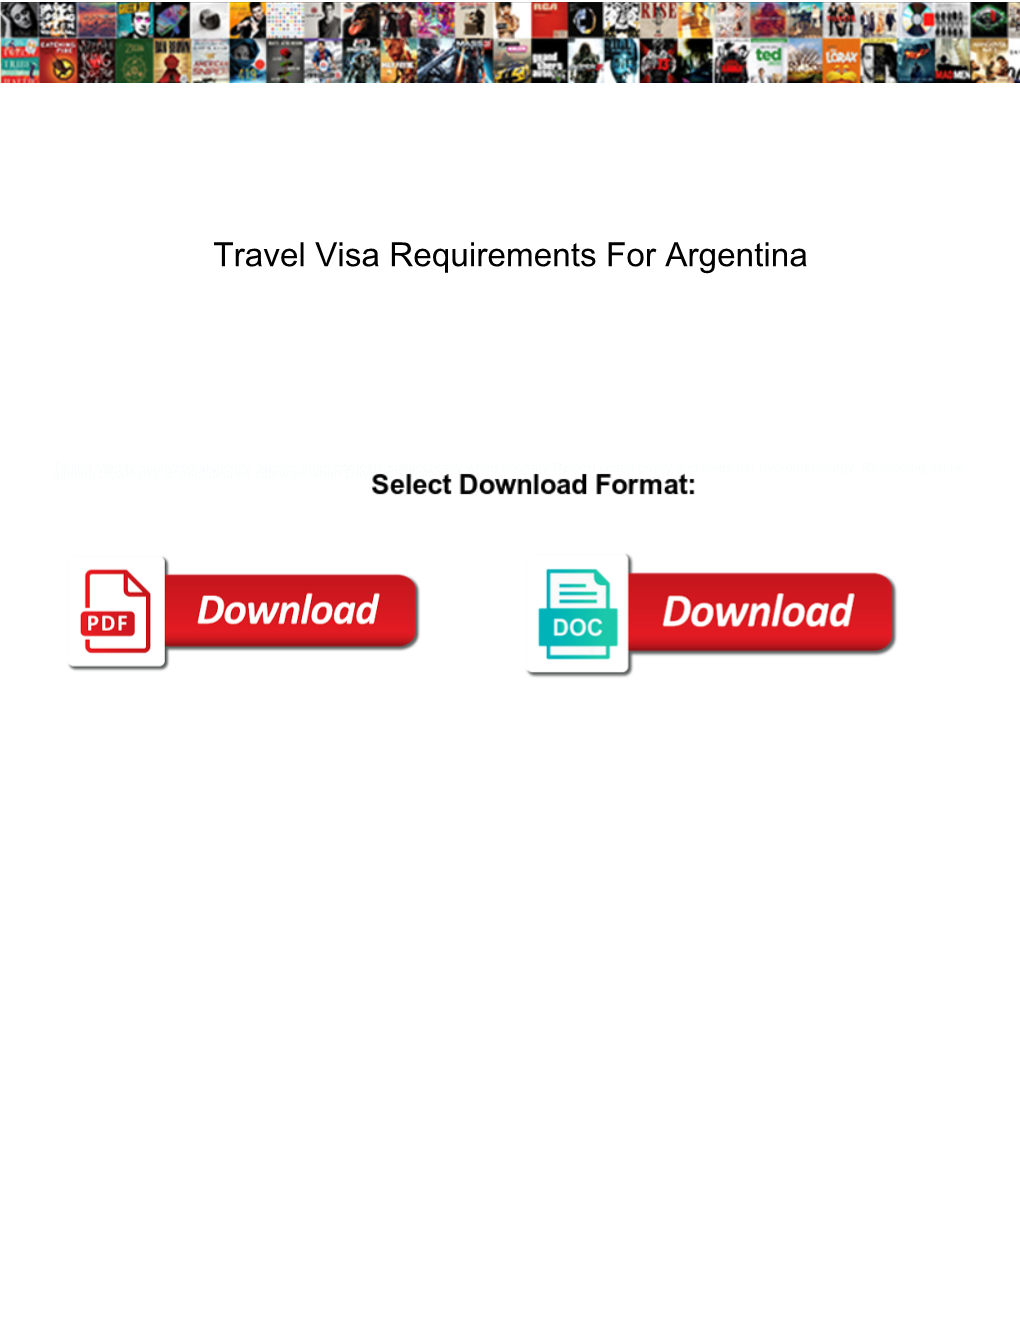 Travel Visa Requirements for Argentina